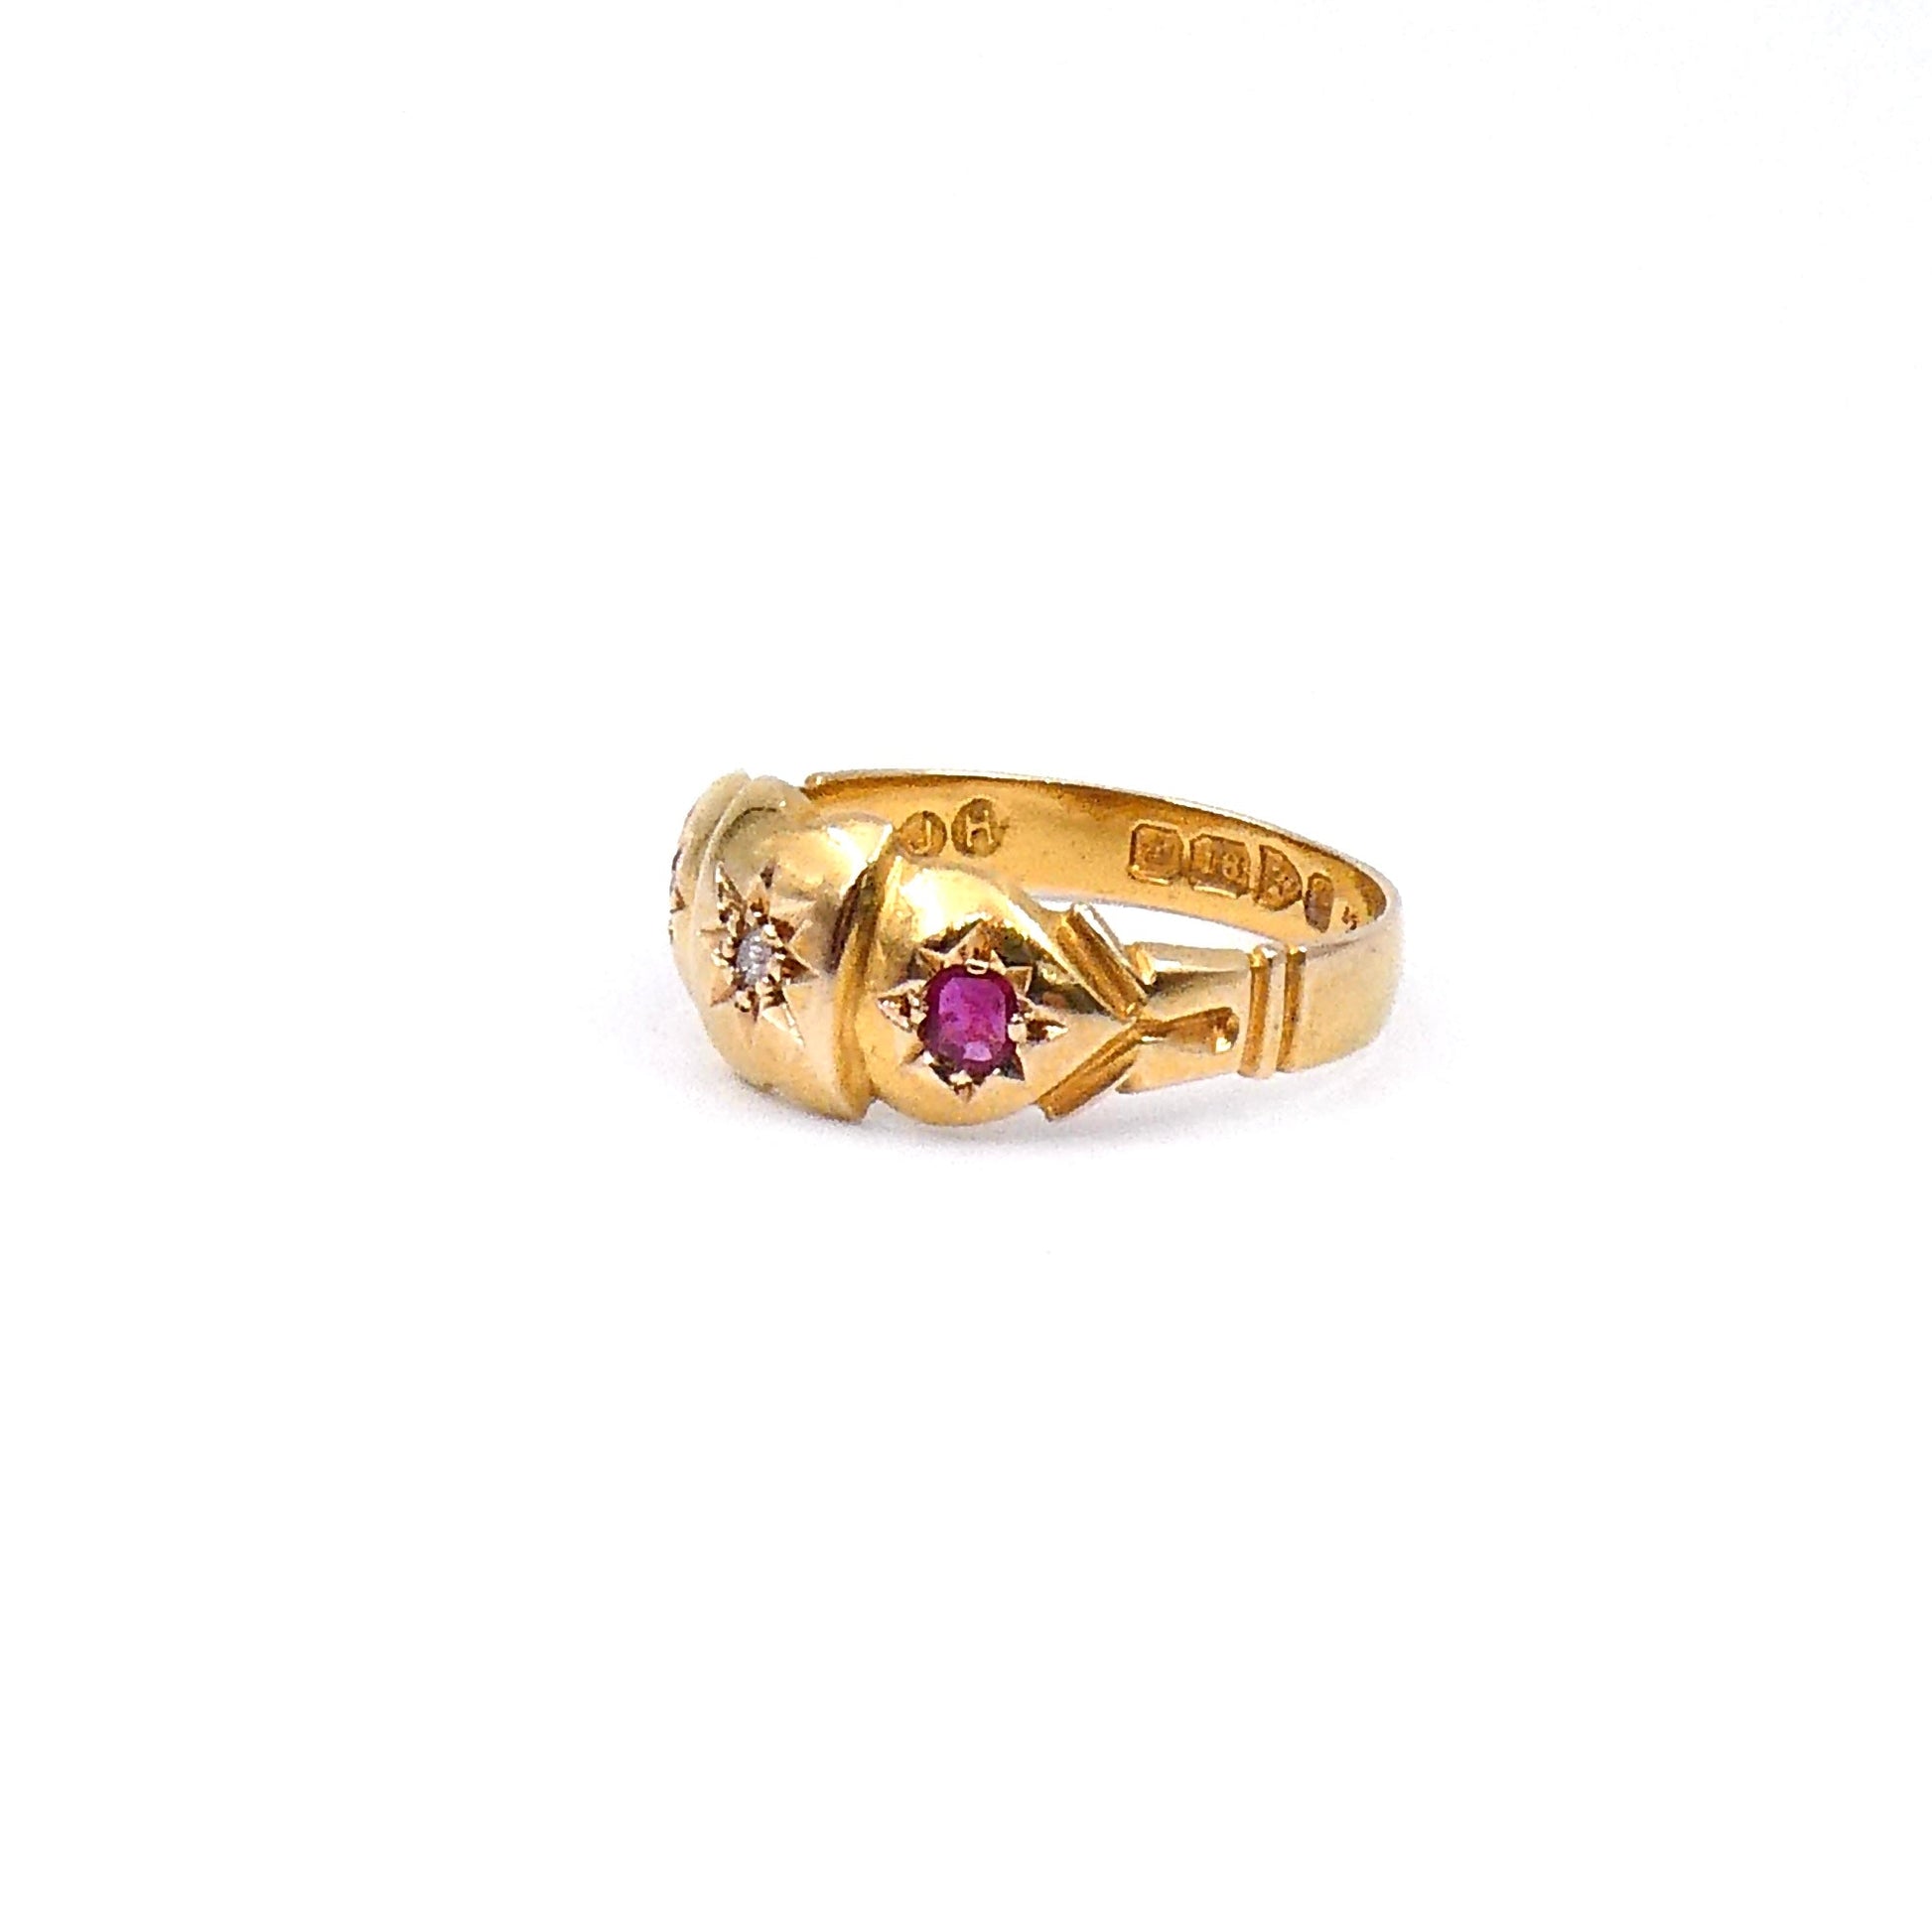 Antique ruby and diamond gypsy ring in 18kt gold, hallmarked Chester 1903. - Collected